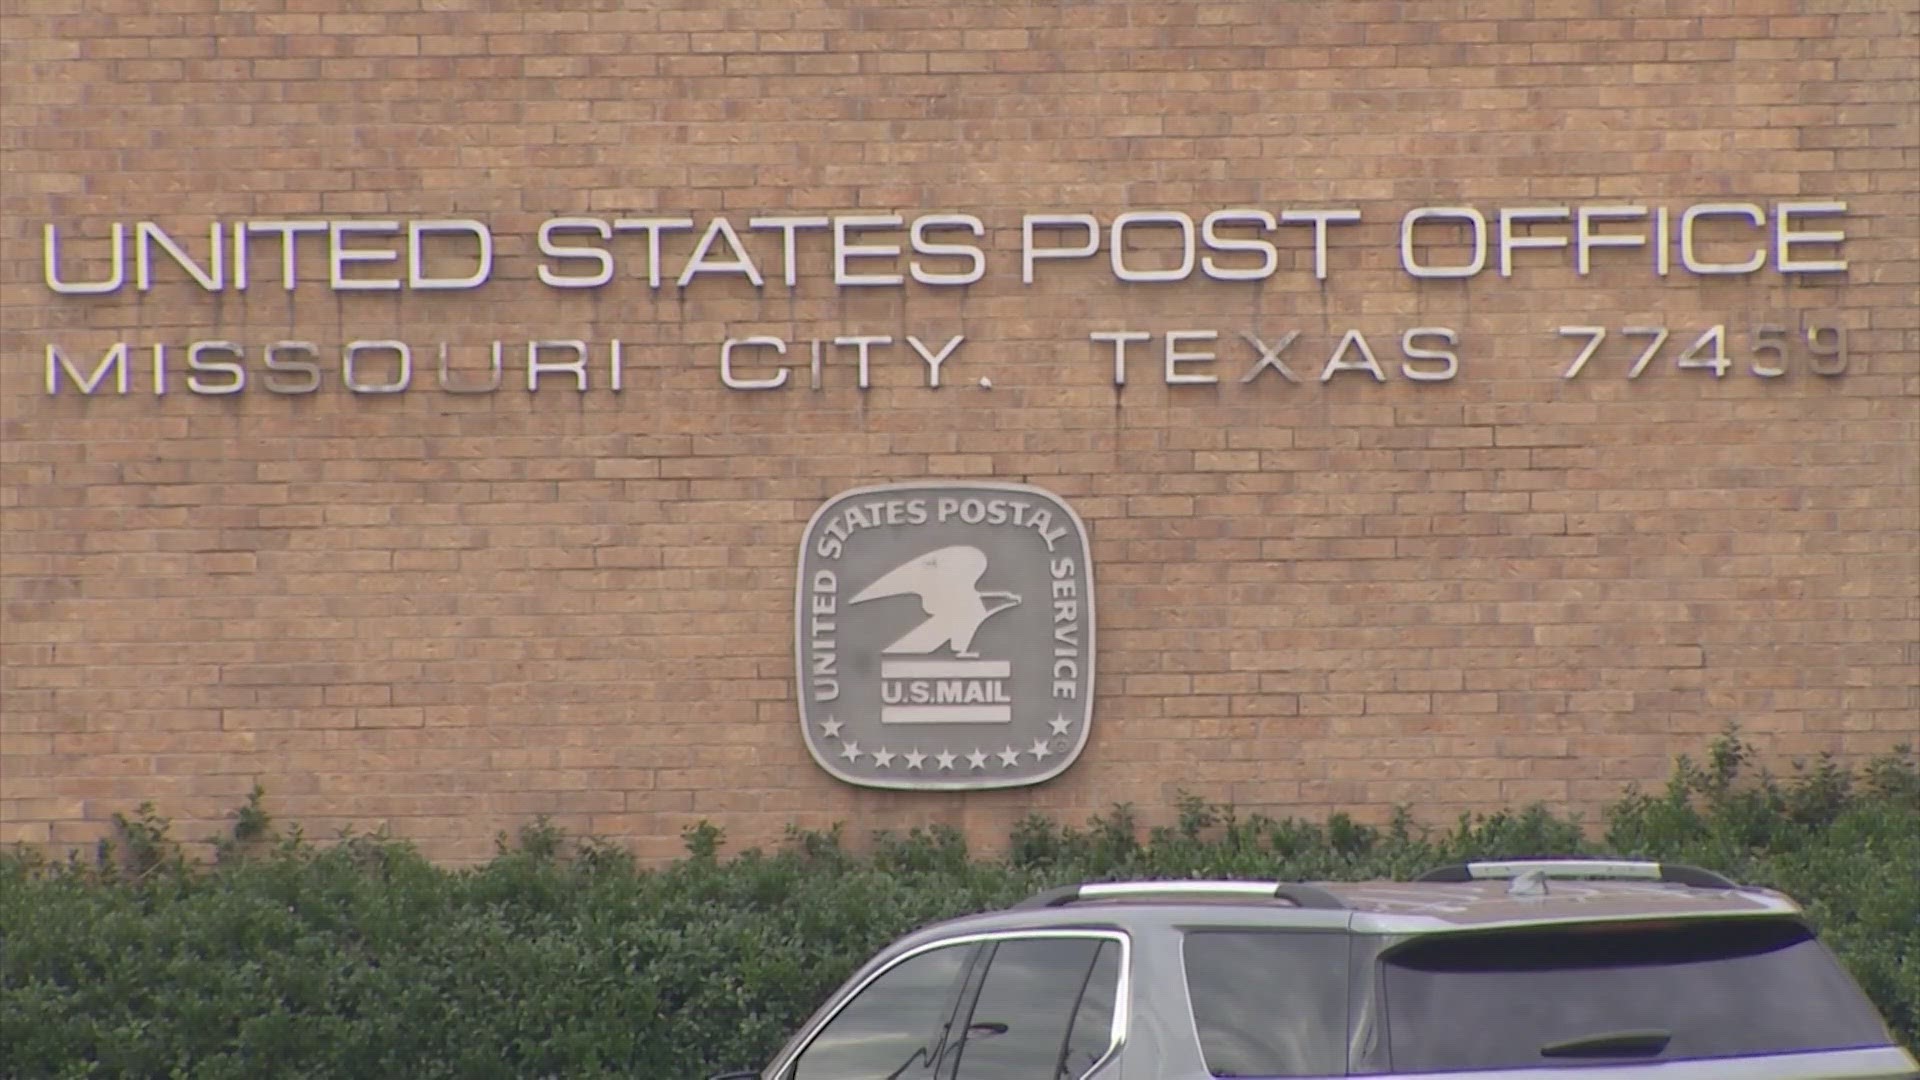 Dozens of KHOU 11 viewers have shared stories about their mail being stuck at a sorting facility in Missouri City.